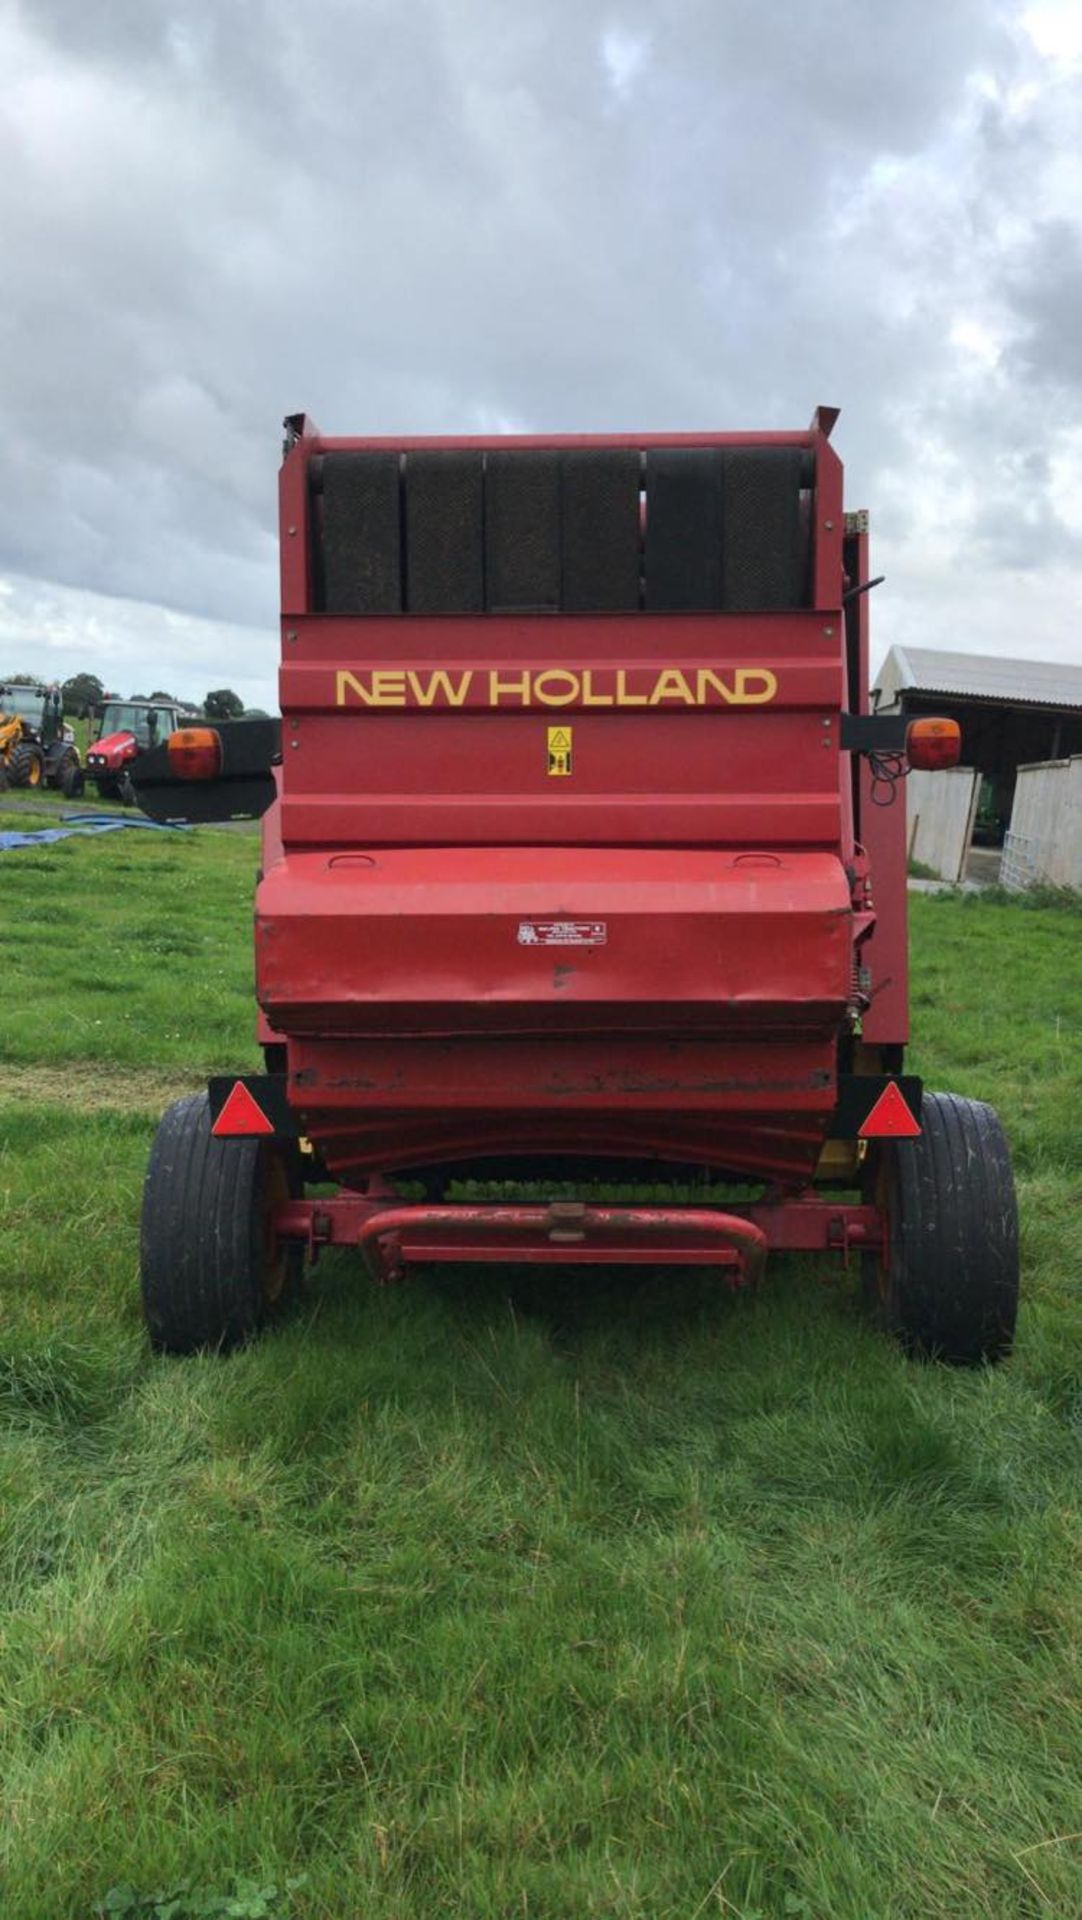 1999 New Holland 648 Variable Chamber Round Baler with control box - Image 3 of 3